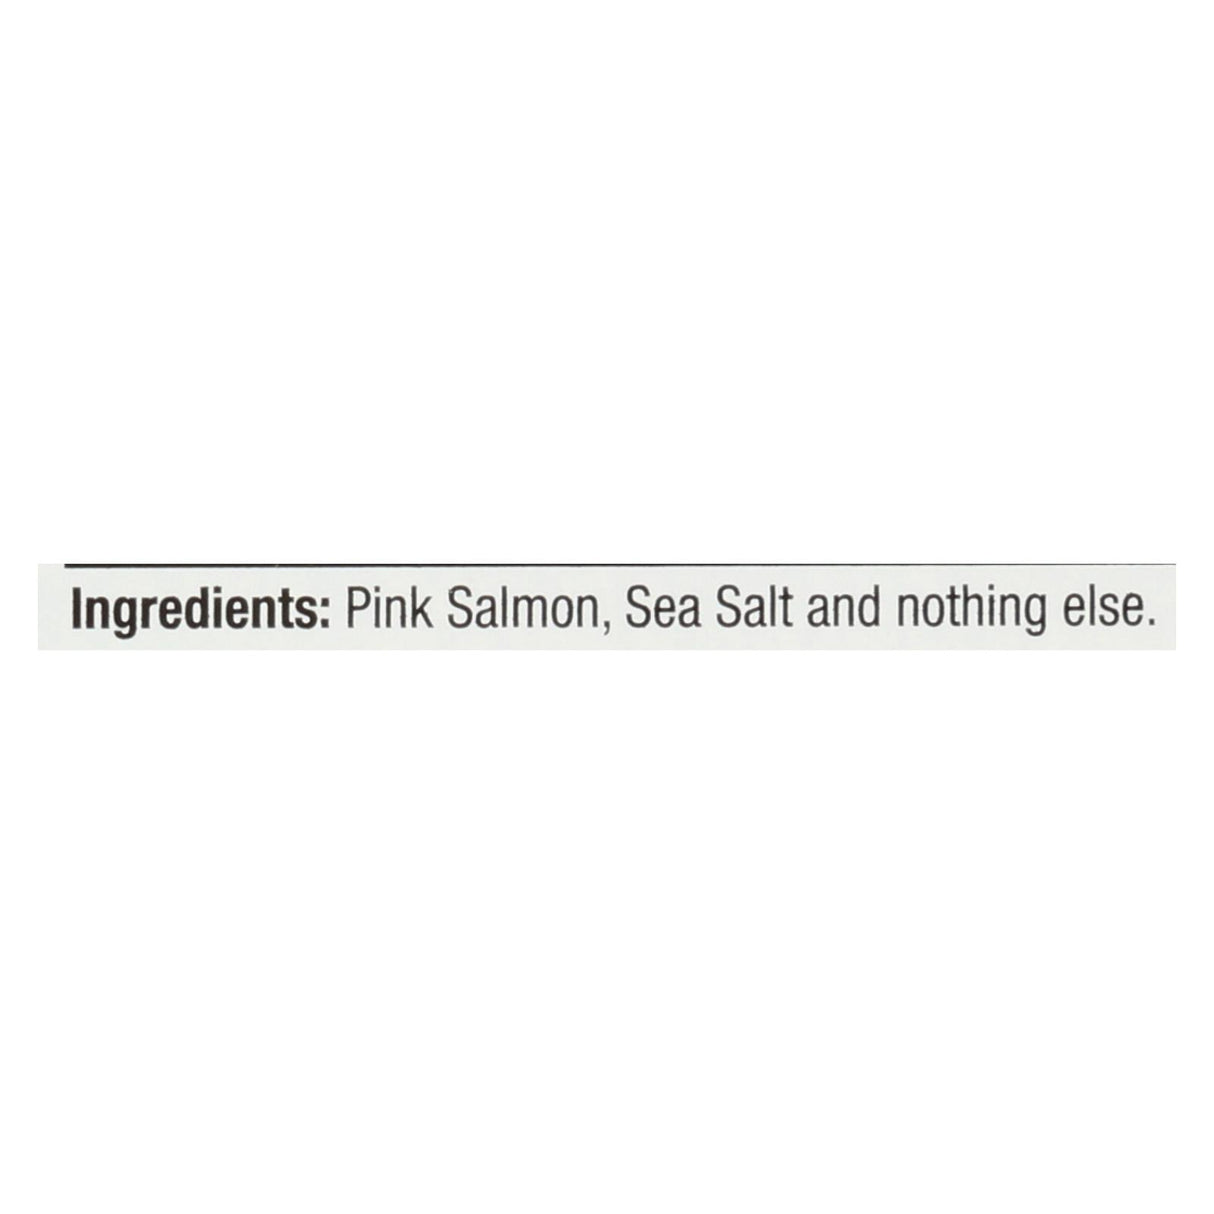 Henry and Lisa's Natural Seafood Wild Alaskan Pink Salmon (Pack of 12 - 7.5 Oz.) - Cozy Farm 